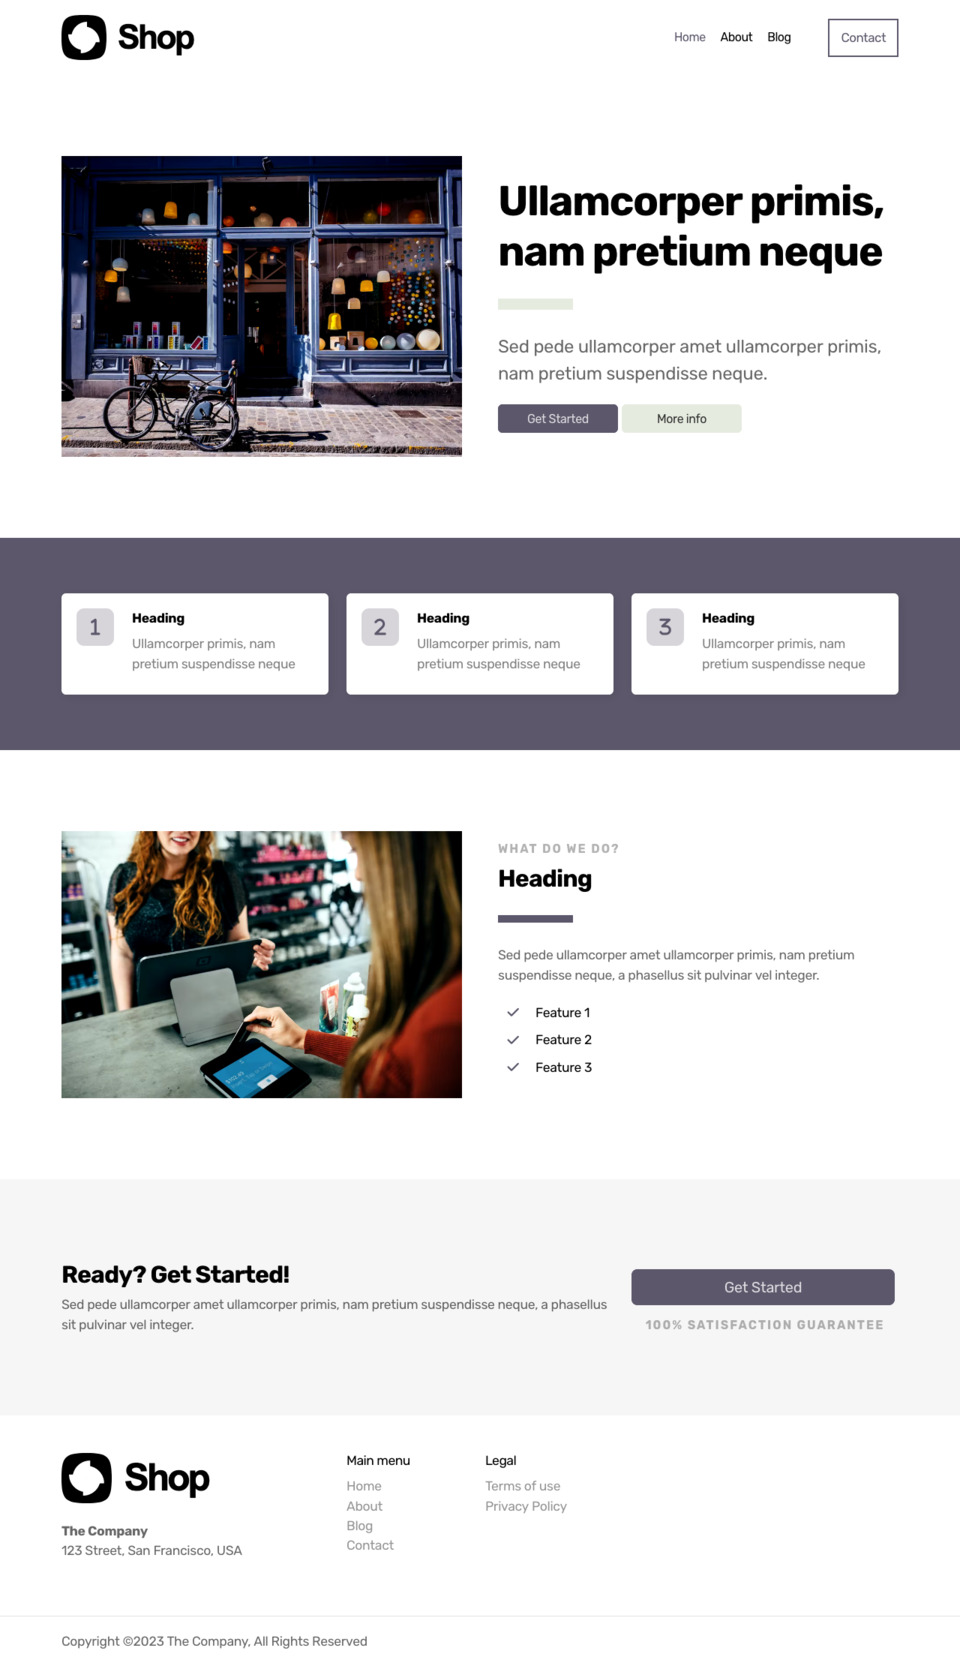 Shop Website Template - Ideal for small business owners, boutique owners, retail shops, e-commerce startups, and anyone looking to launch an online store quickly and effortlessly.